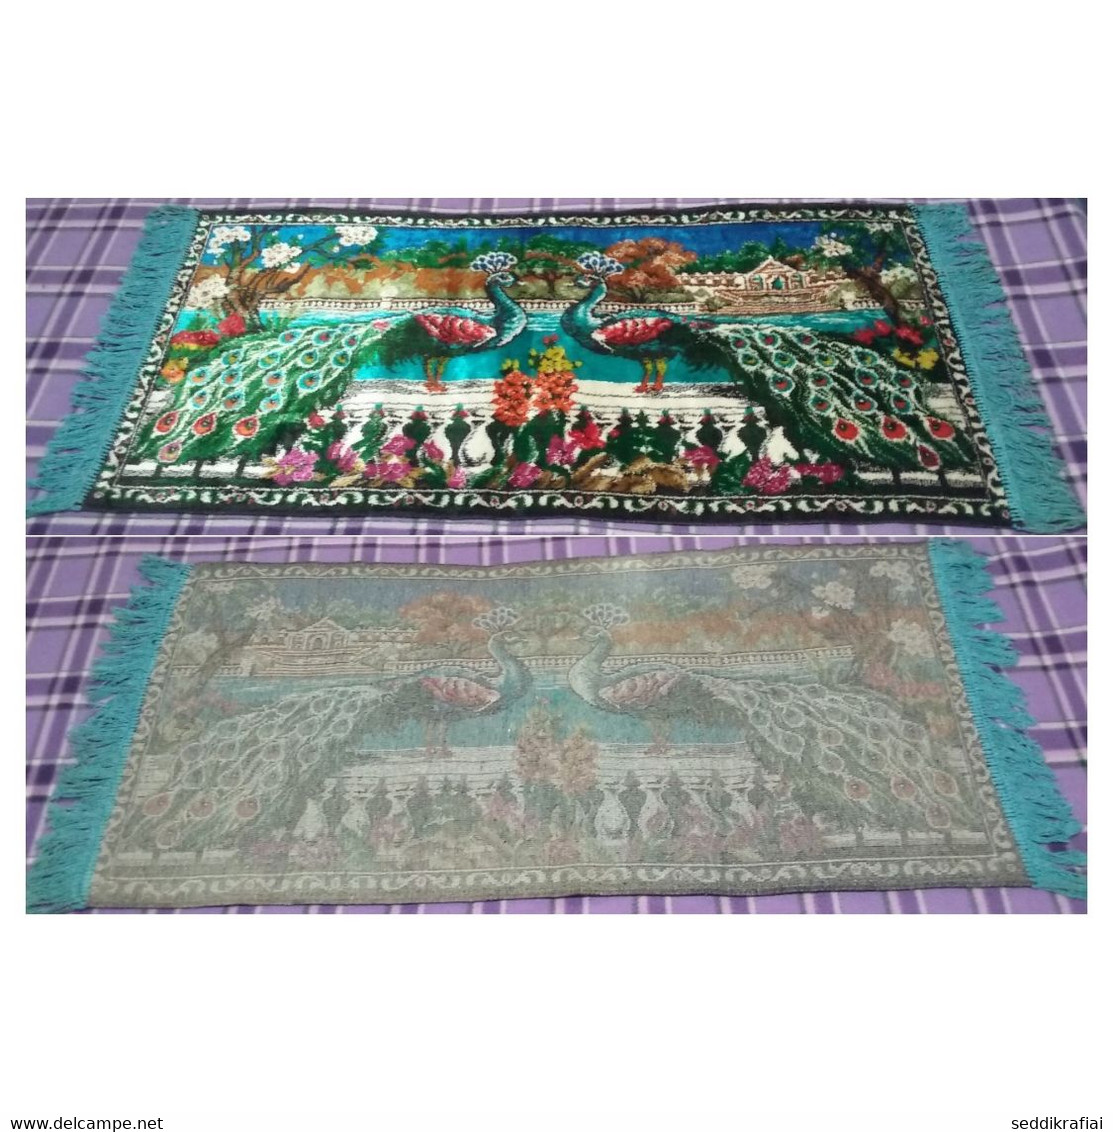 Antique Carpet Peacock Shaggy Woven Tablecloth Colorful Wall Rug Original Tapestry 113x50